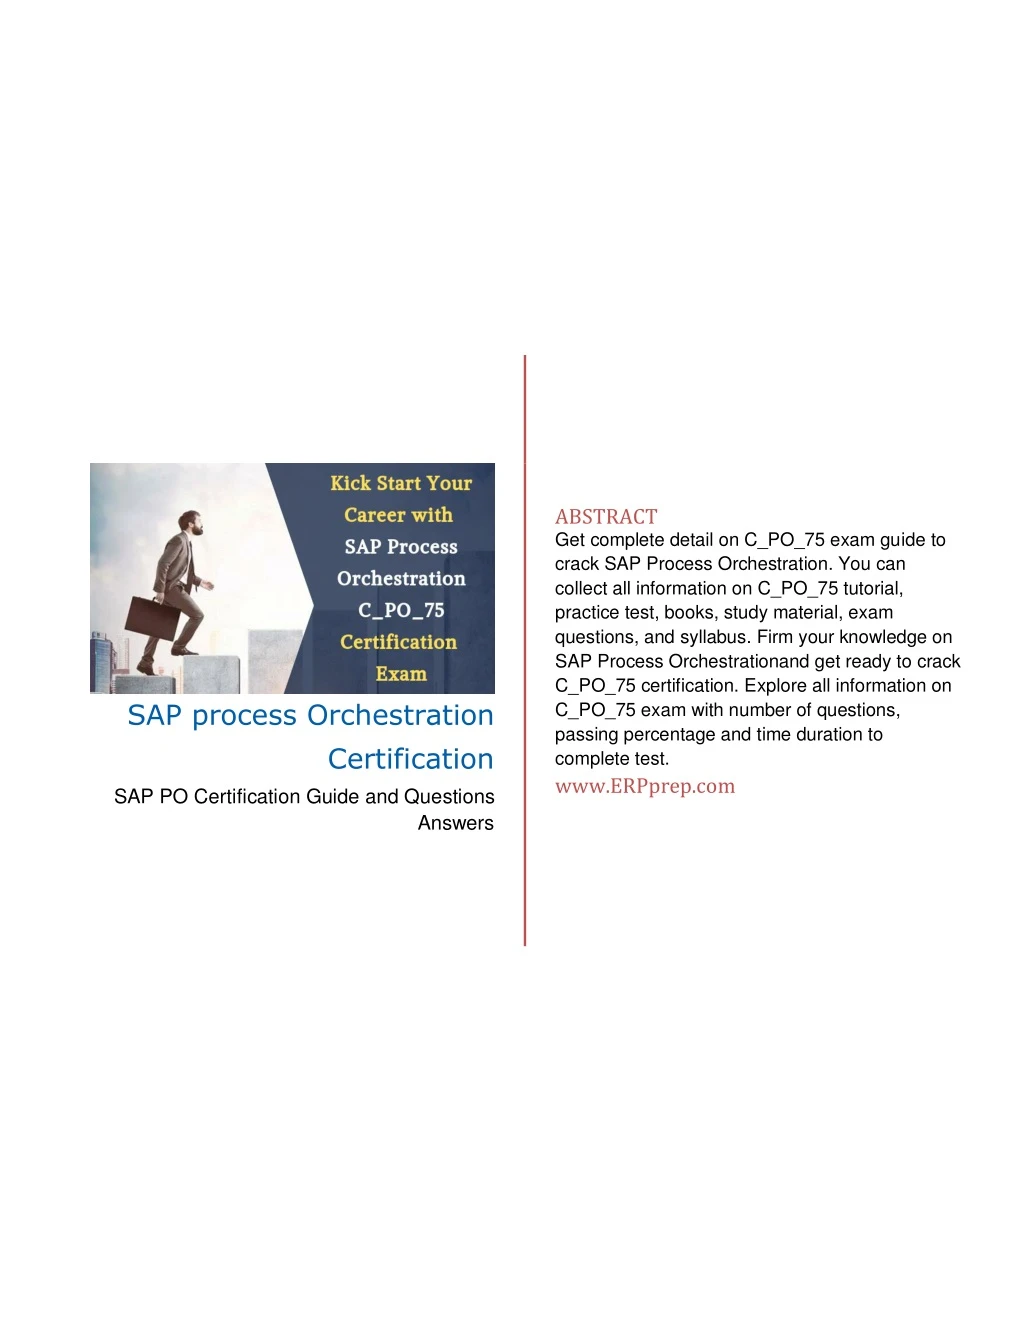 abstract get complete detail on c po 75 exam